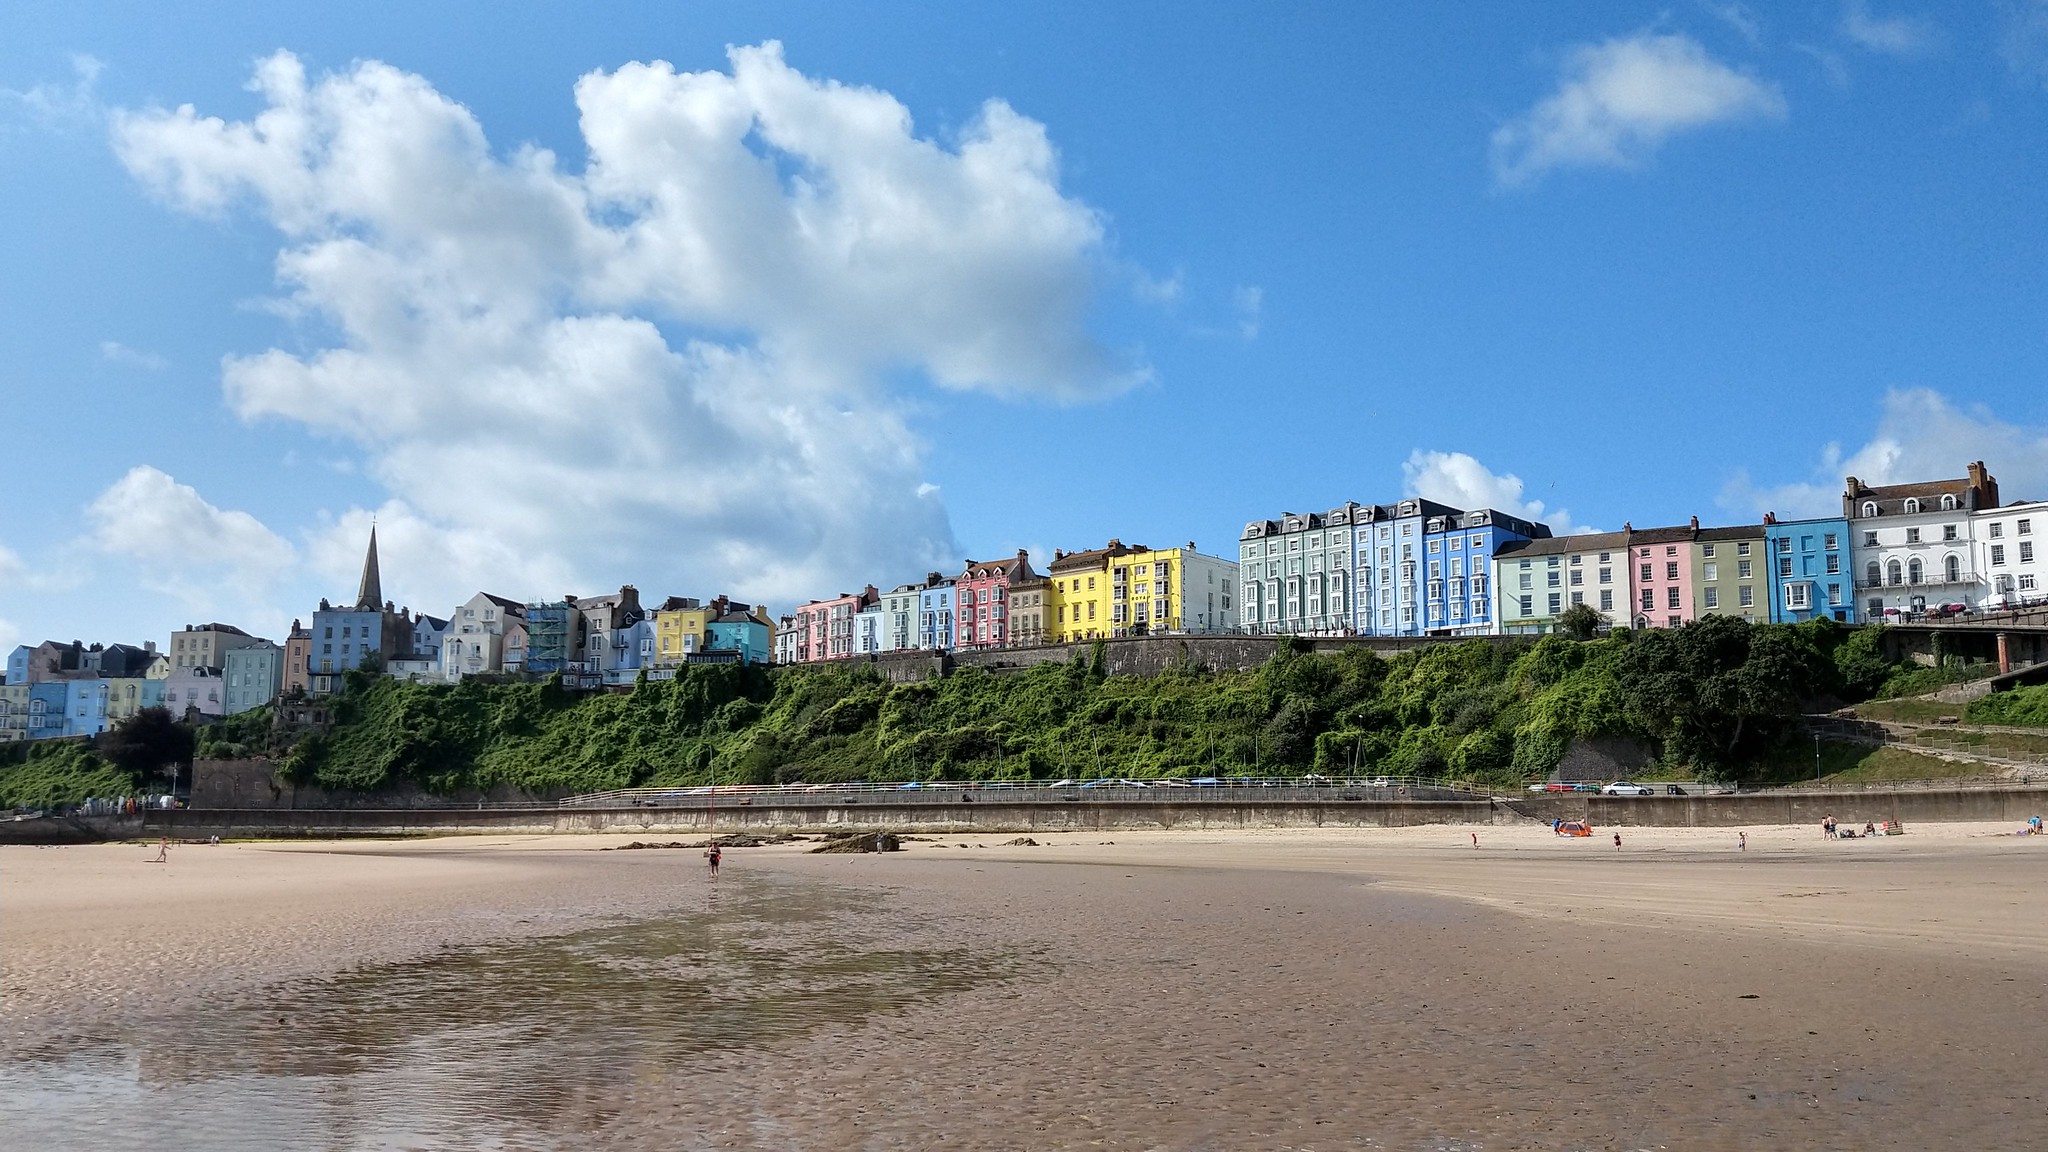 Tenby North Beach - Photo "The colourful buildings along Tenby's north